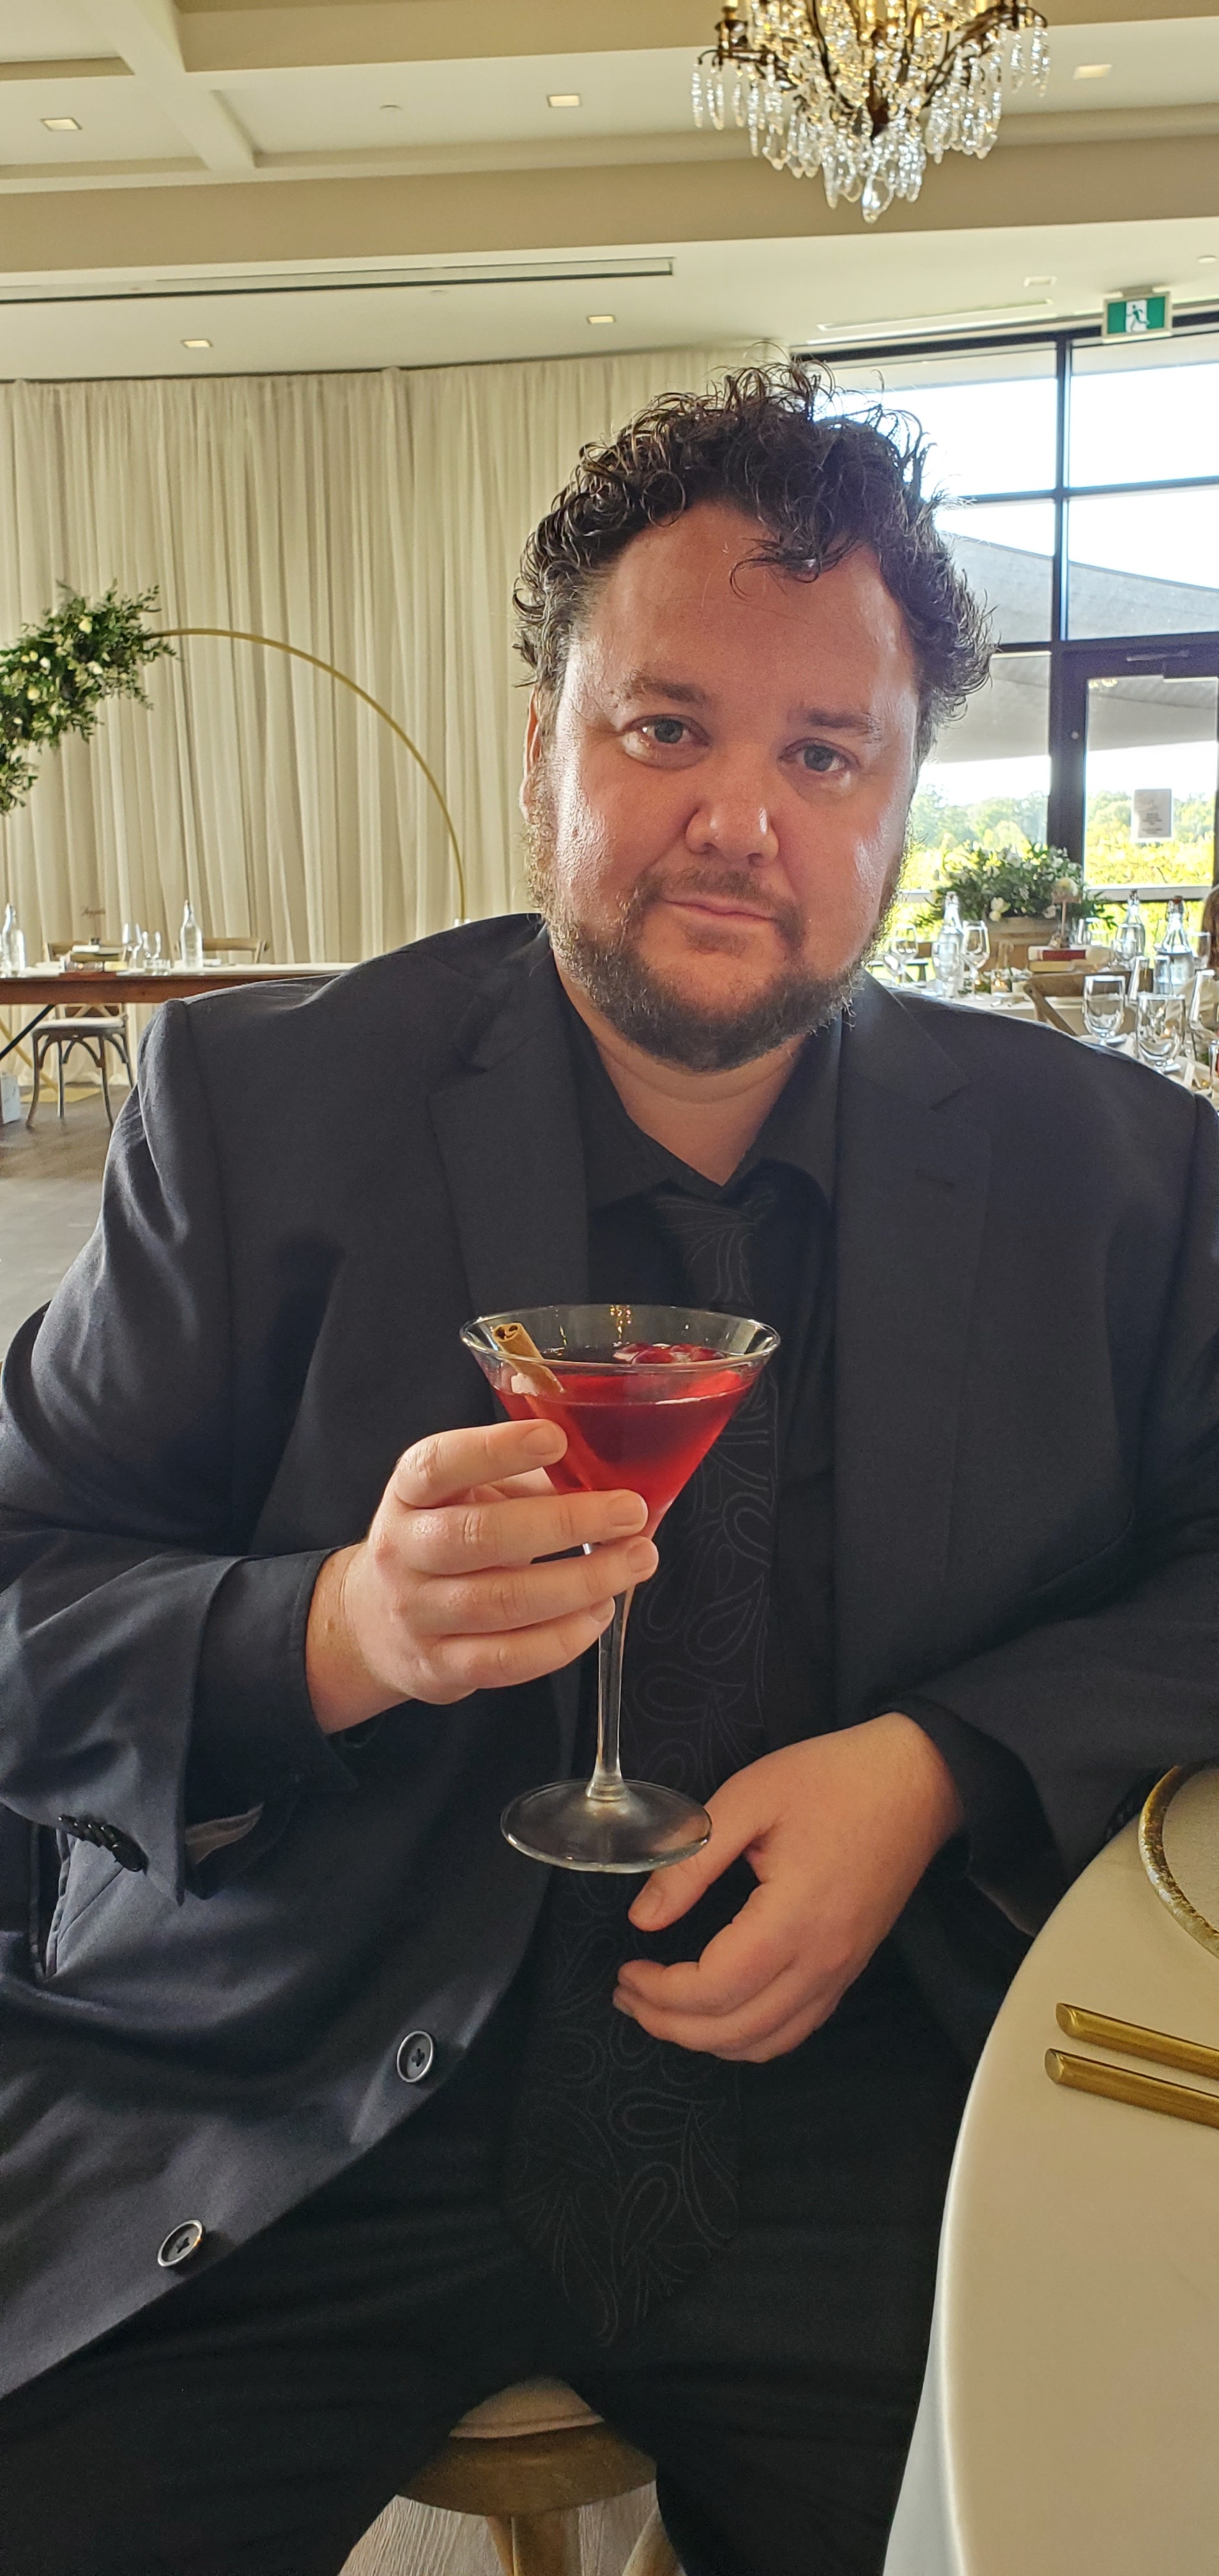 Daniel Legault, in a black suit and lie, leaning against a table, while saluting the camera with cocktail in a martini glass with a cinnamon stick garnish.